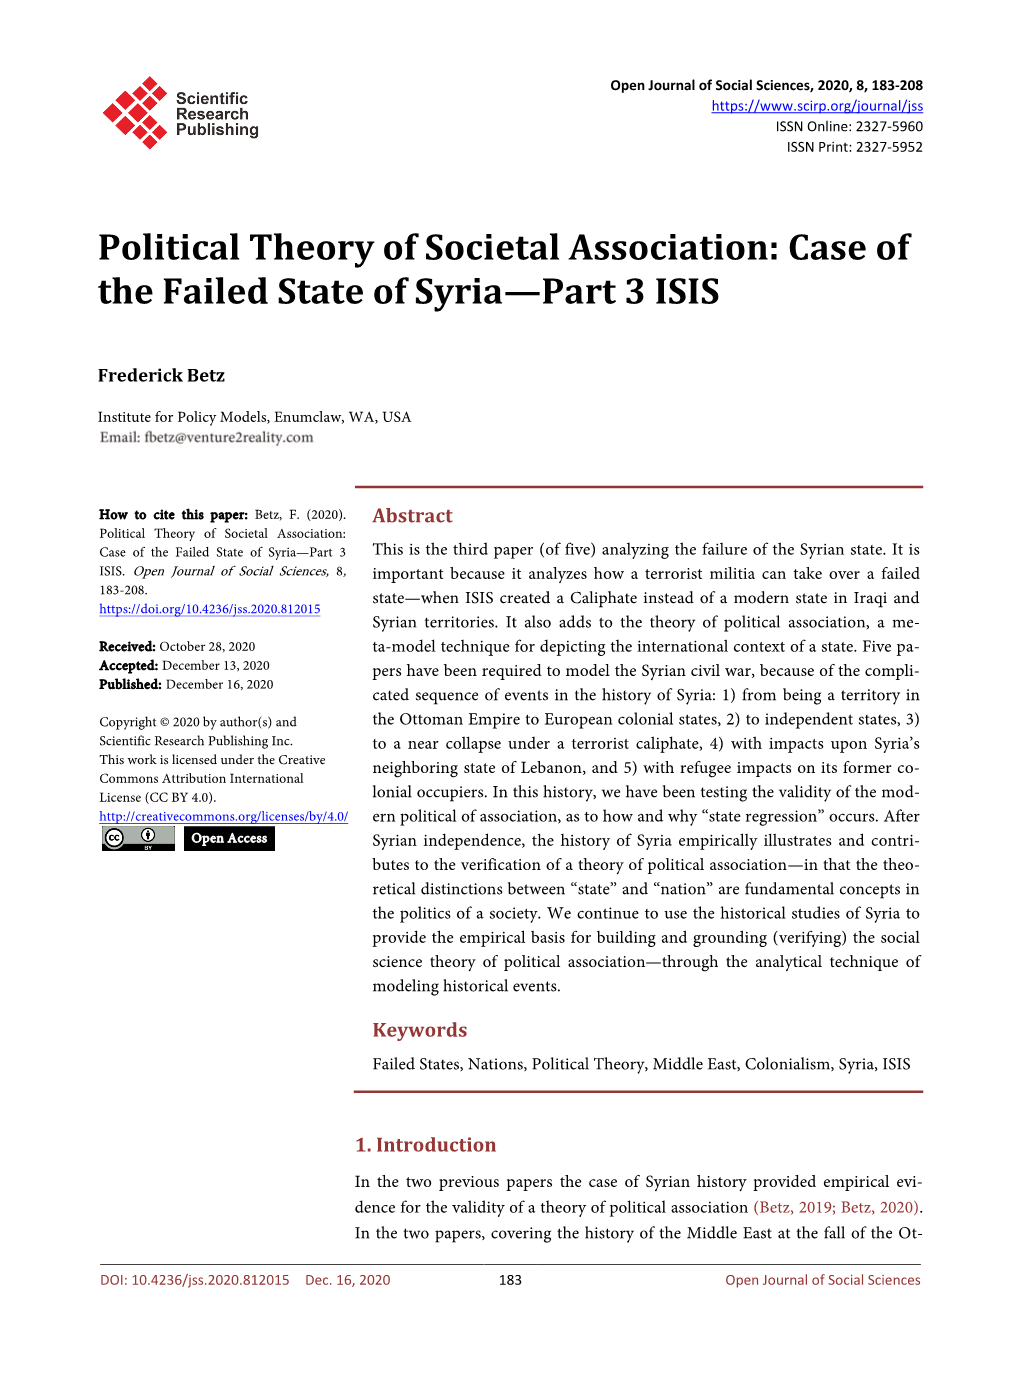 Political Theory of Societal Association: Case of the Failed State of Syria—Part 3 ISIS